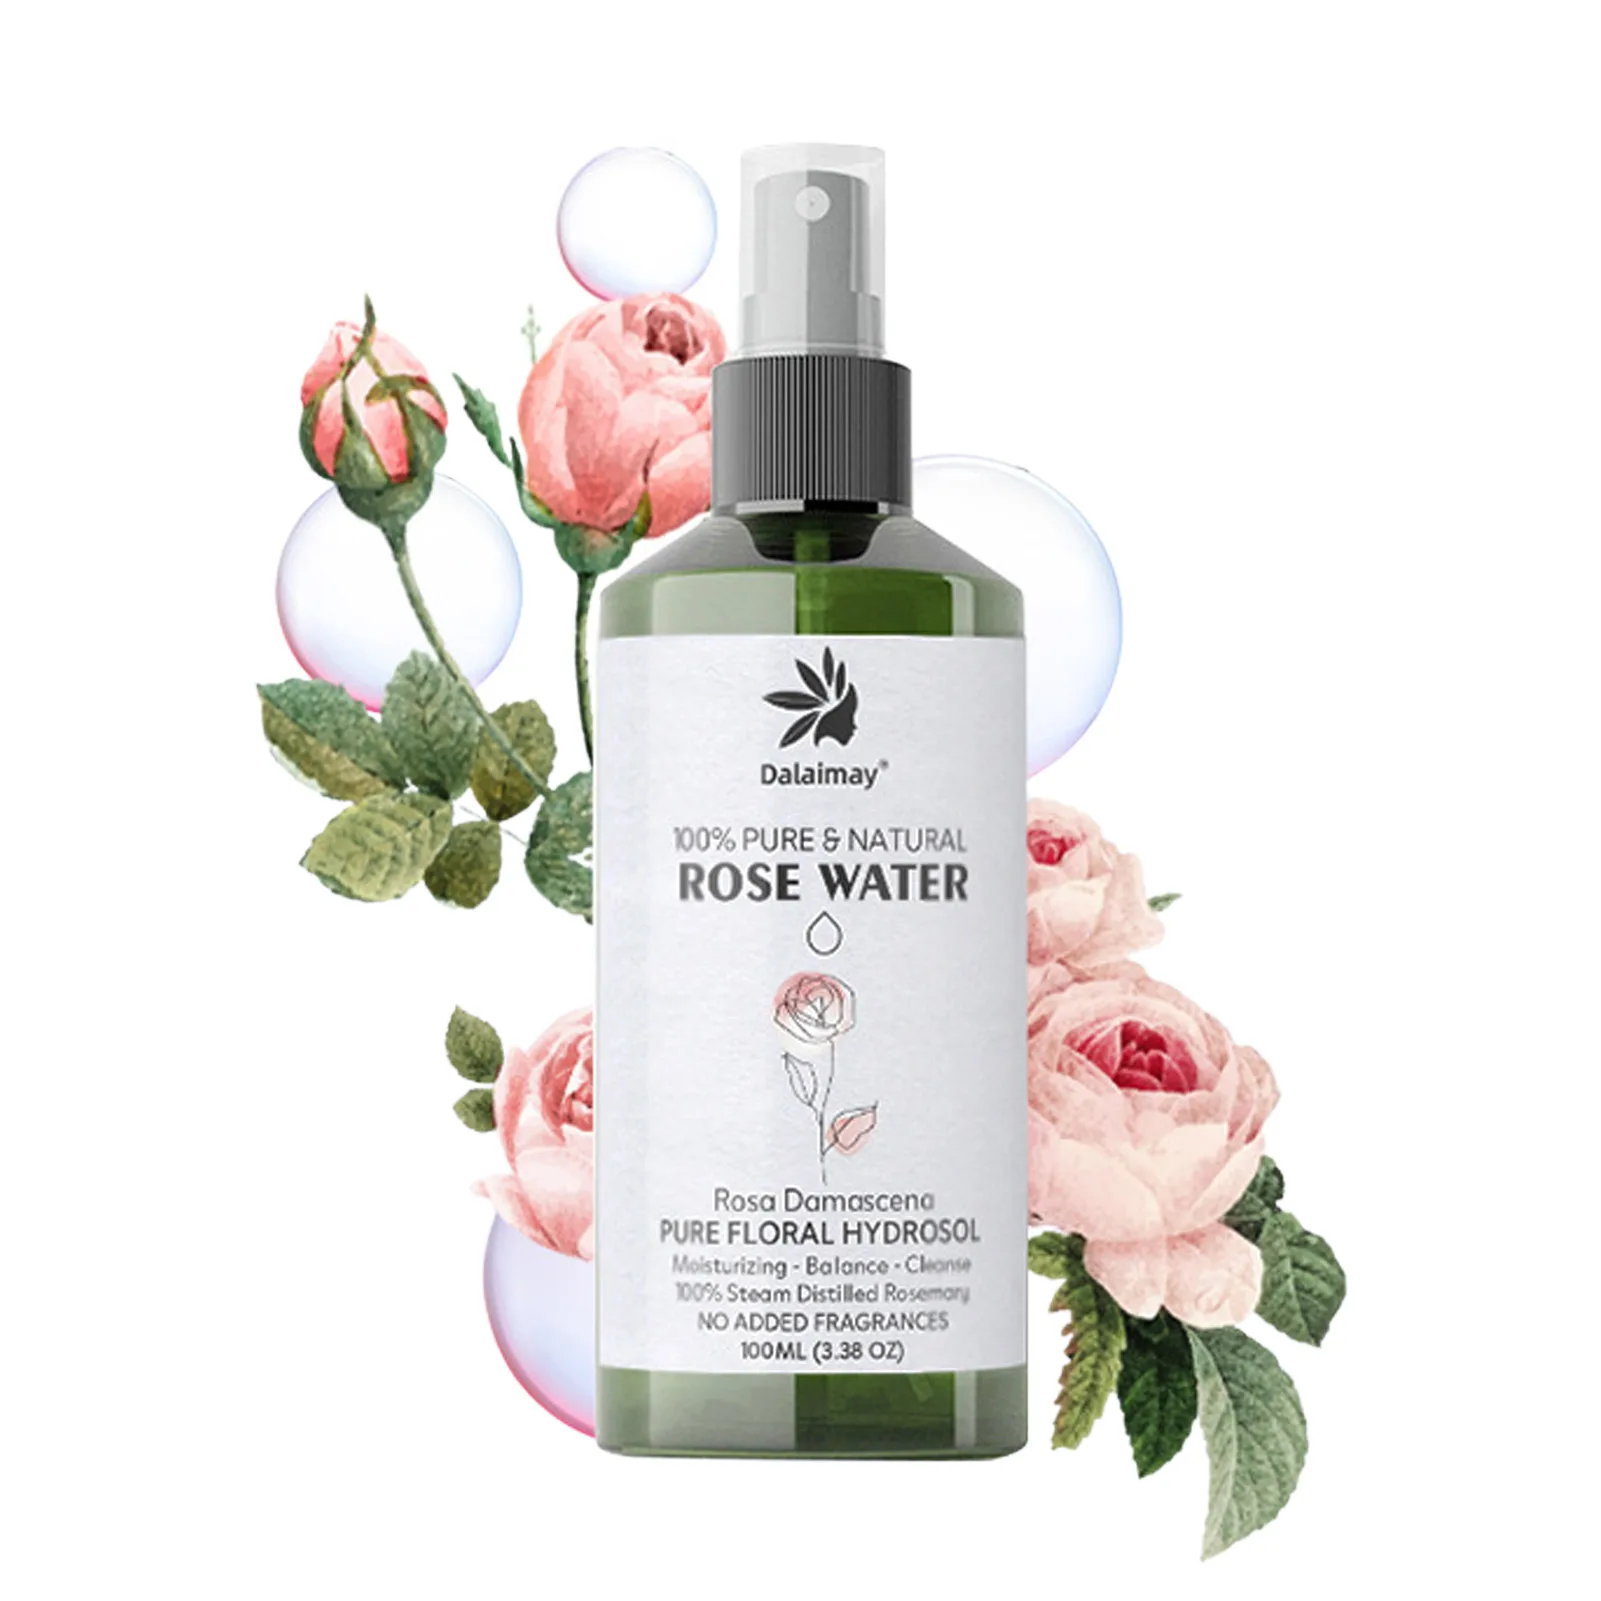 

Rose Water Spray Organic Rose Floral Water 100 Pure And Natural Face Hydrosol Face Mist Spray To Moisturize Dry Skin & Uplift